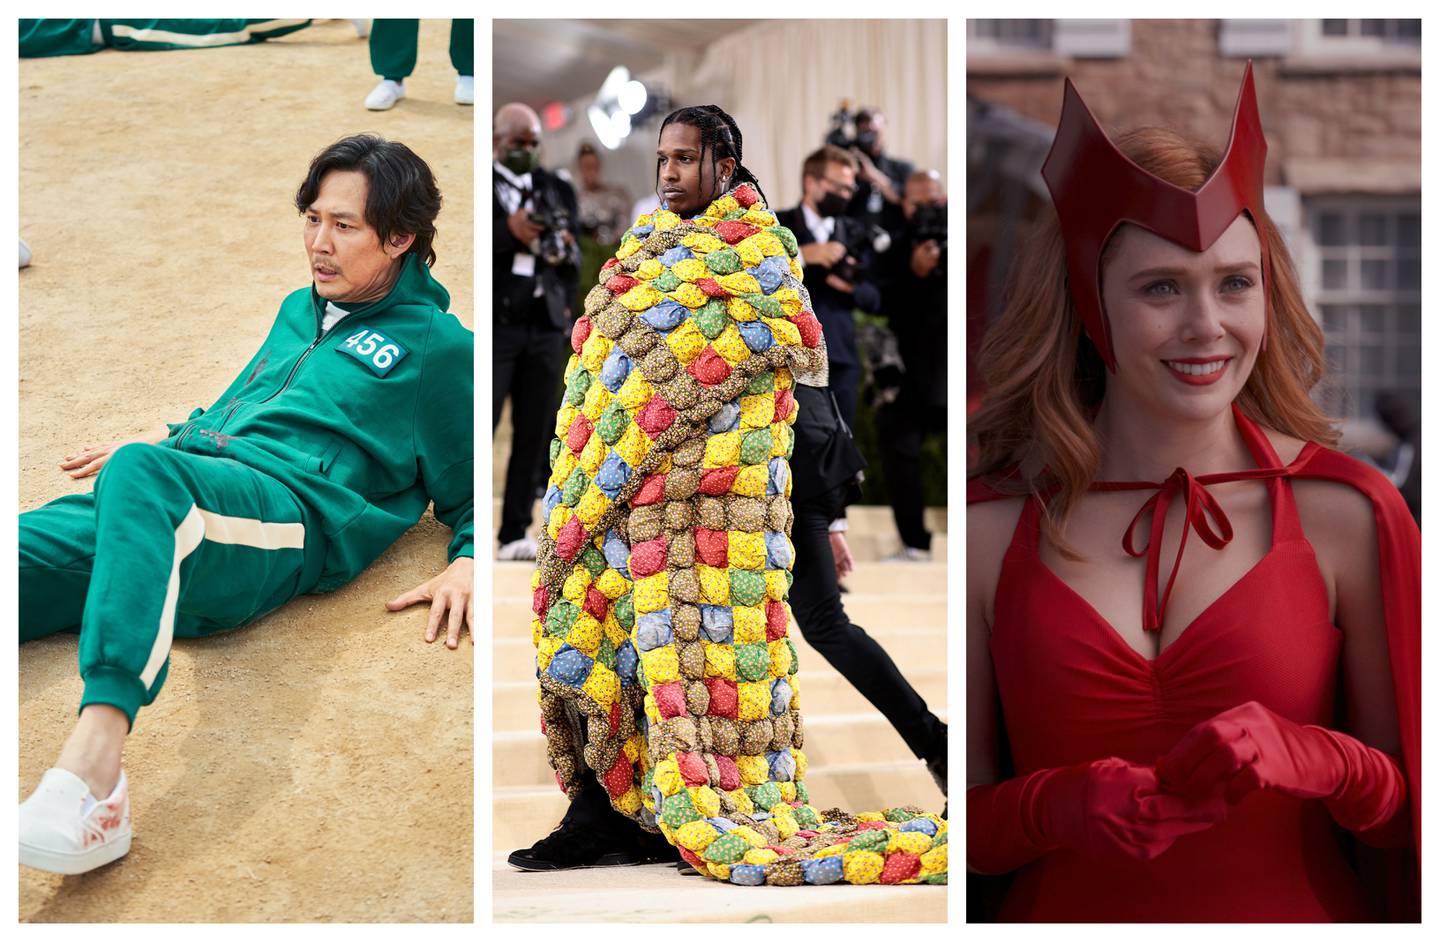 Characters from 'Squid Game', A$AP Rocky wrapped in a quilt at the Met Gala and 'WandaVision's' Wanda Maximoff are all costumes likely to be spotted on Halloween. Photo: Netflix, Marvel Studios, Getty Images